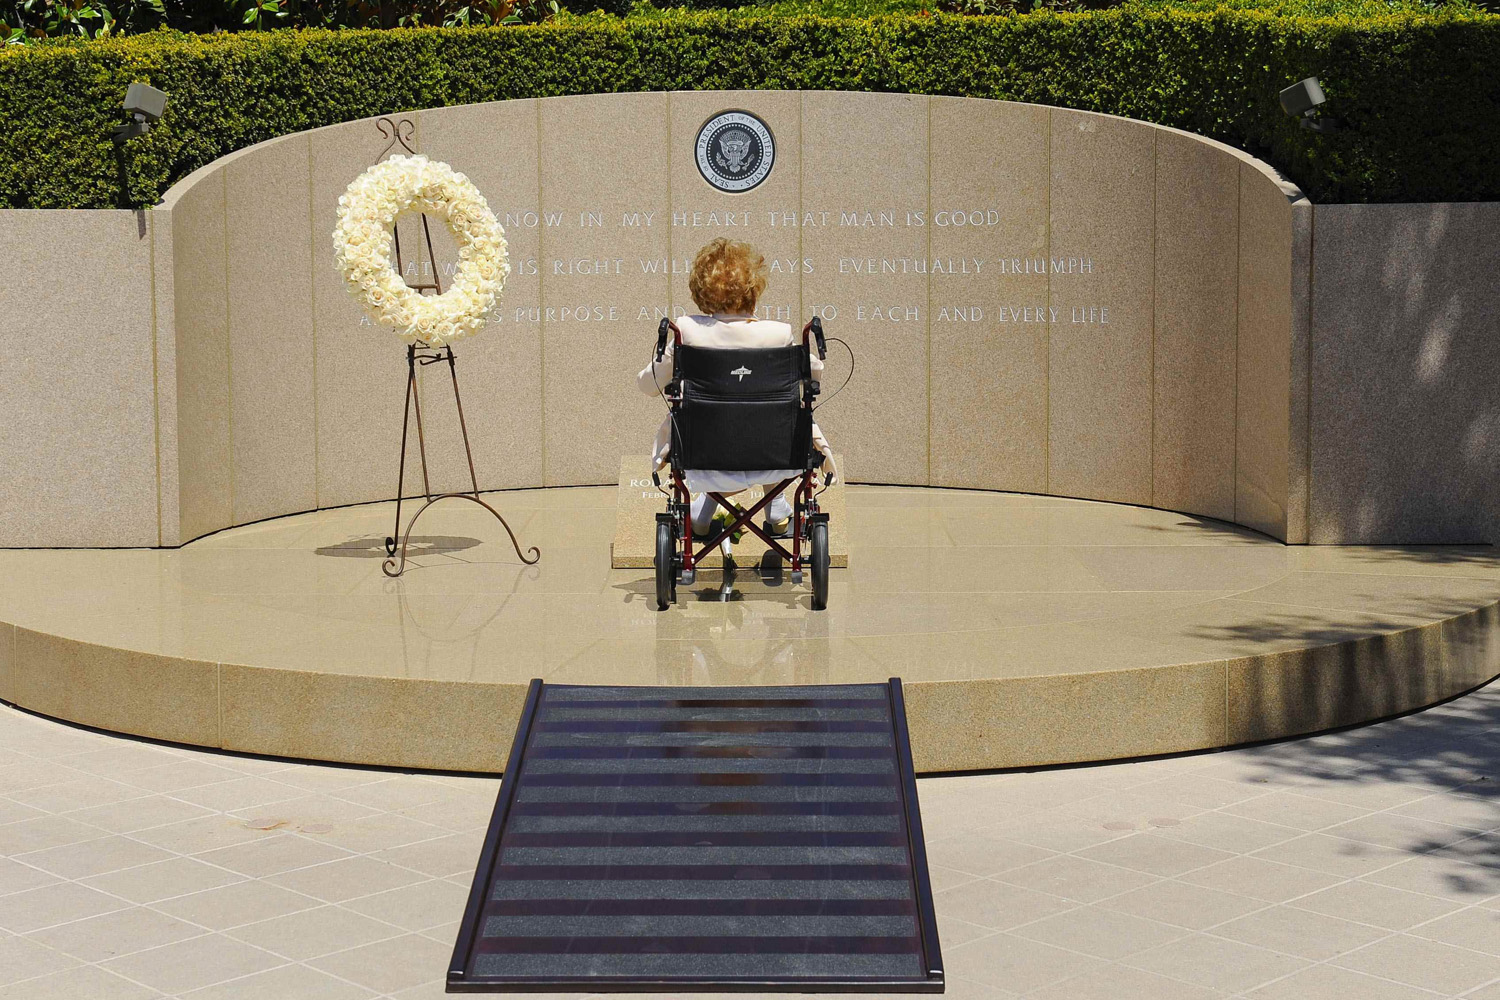 Former first lady of the United States Nancy Reagan visits the grave site of her husband, former U.S. President Ronald Wilson Reagan, at the Ronald Reagan Presidential Library on the 10th anniversary of his passing, in Simi Valley